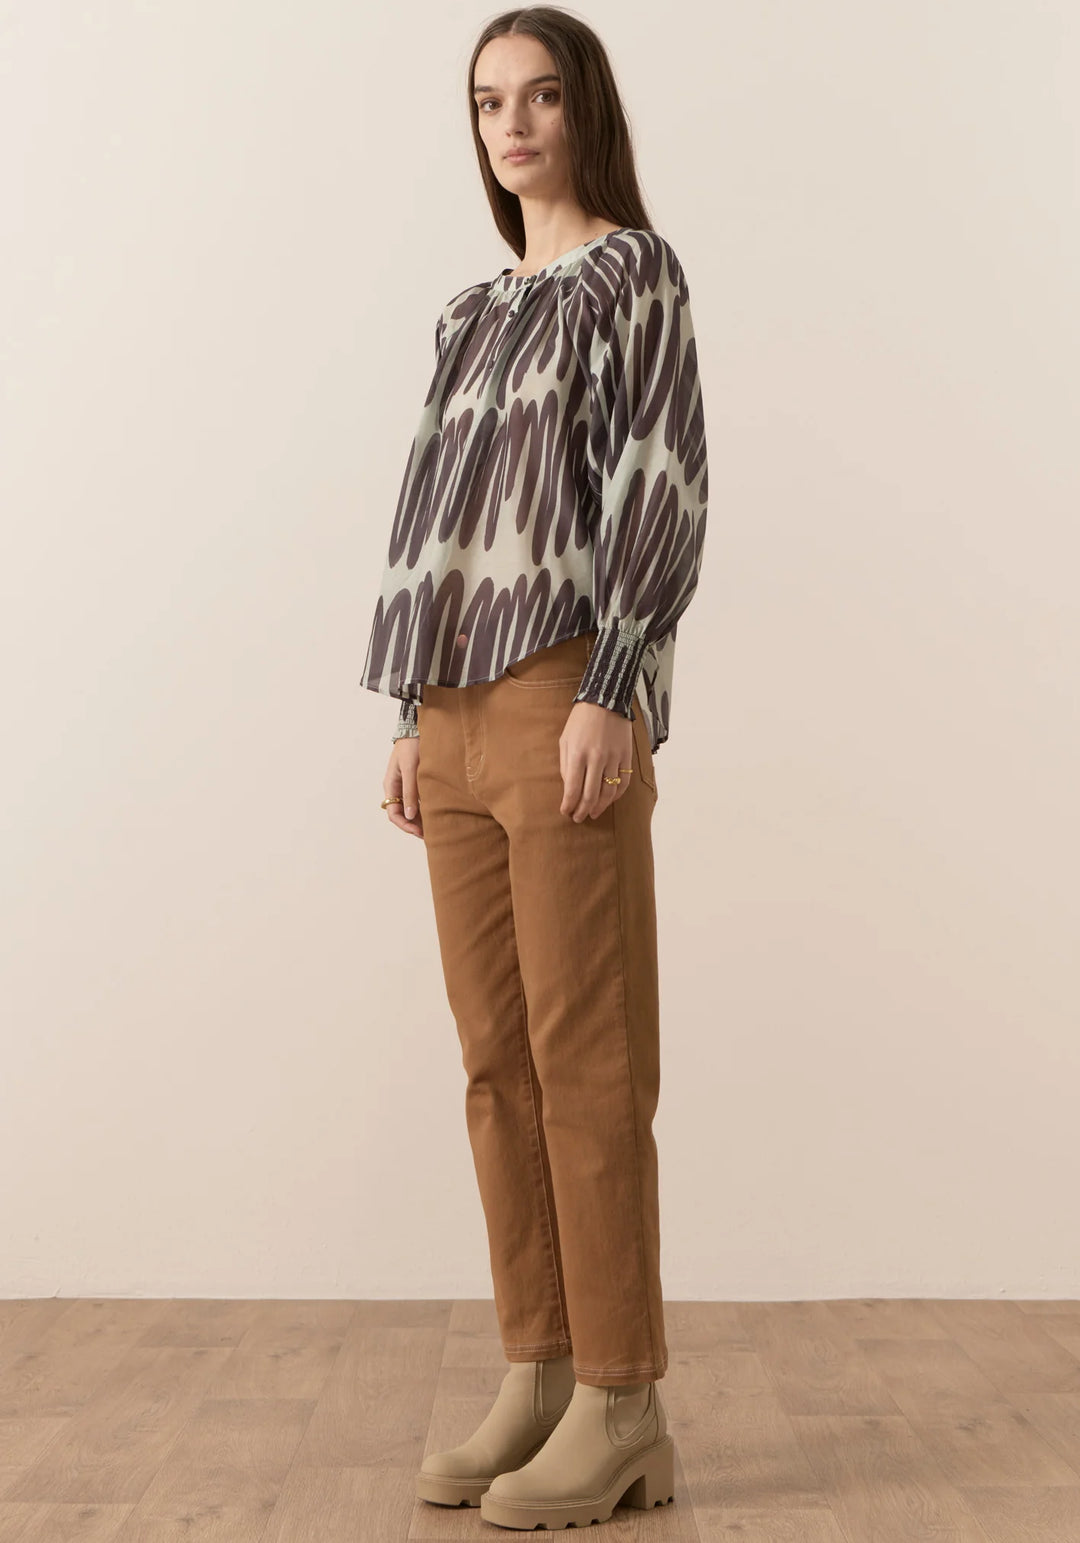 POL Quill Top - Quill Print Tops POL   